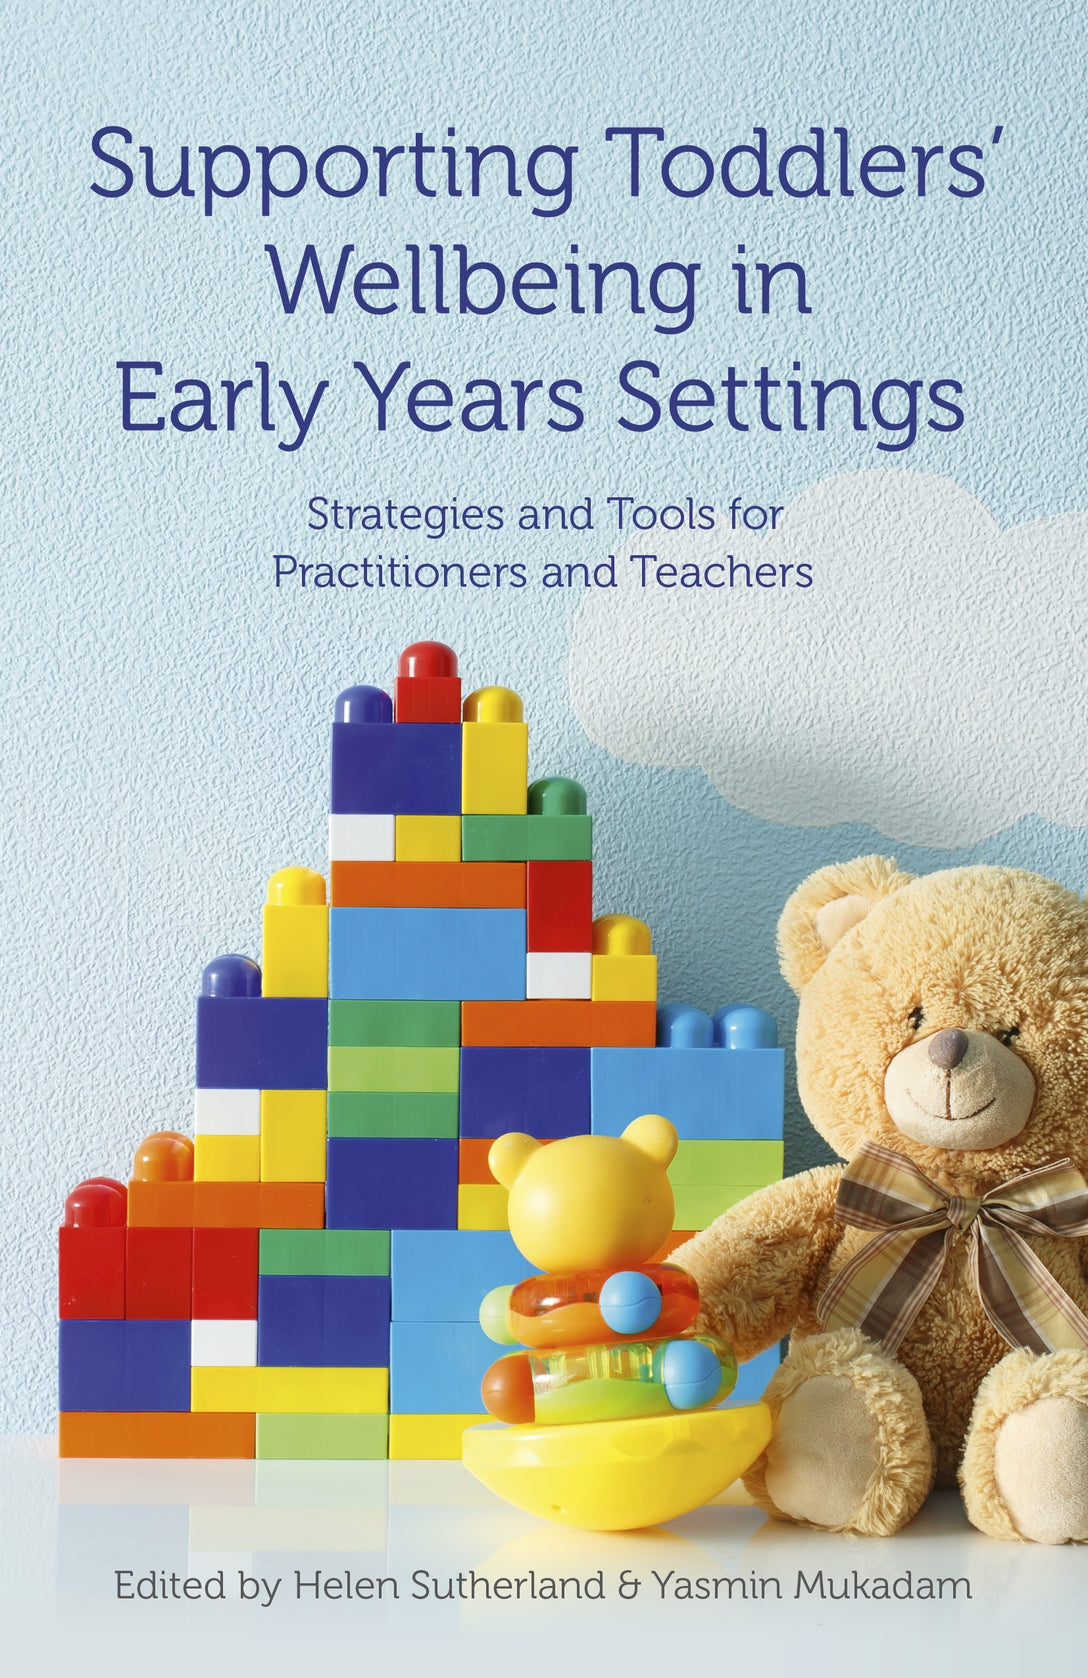 Supporting Toddlers' Wellbeing in Early Years Settings by No Author Listed, Ms Helen Sutherland, Anne Rawlings, Yasmin Mukadam